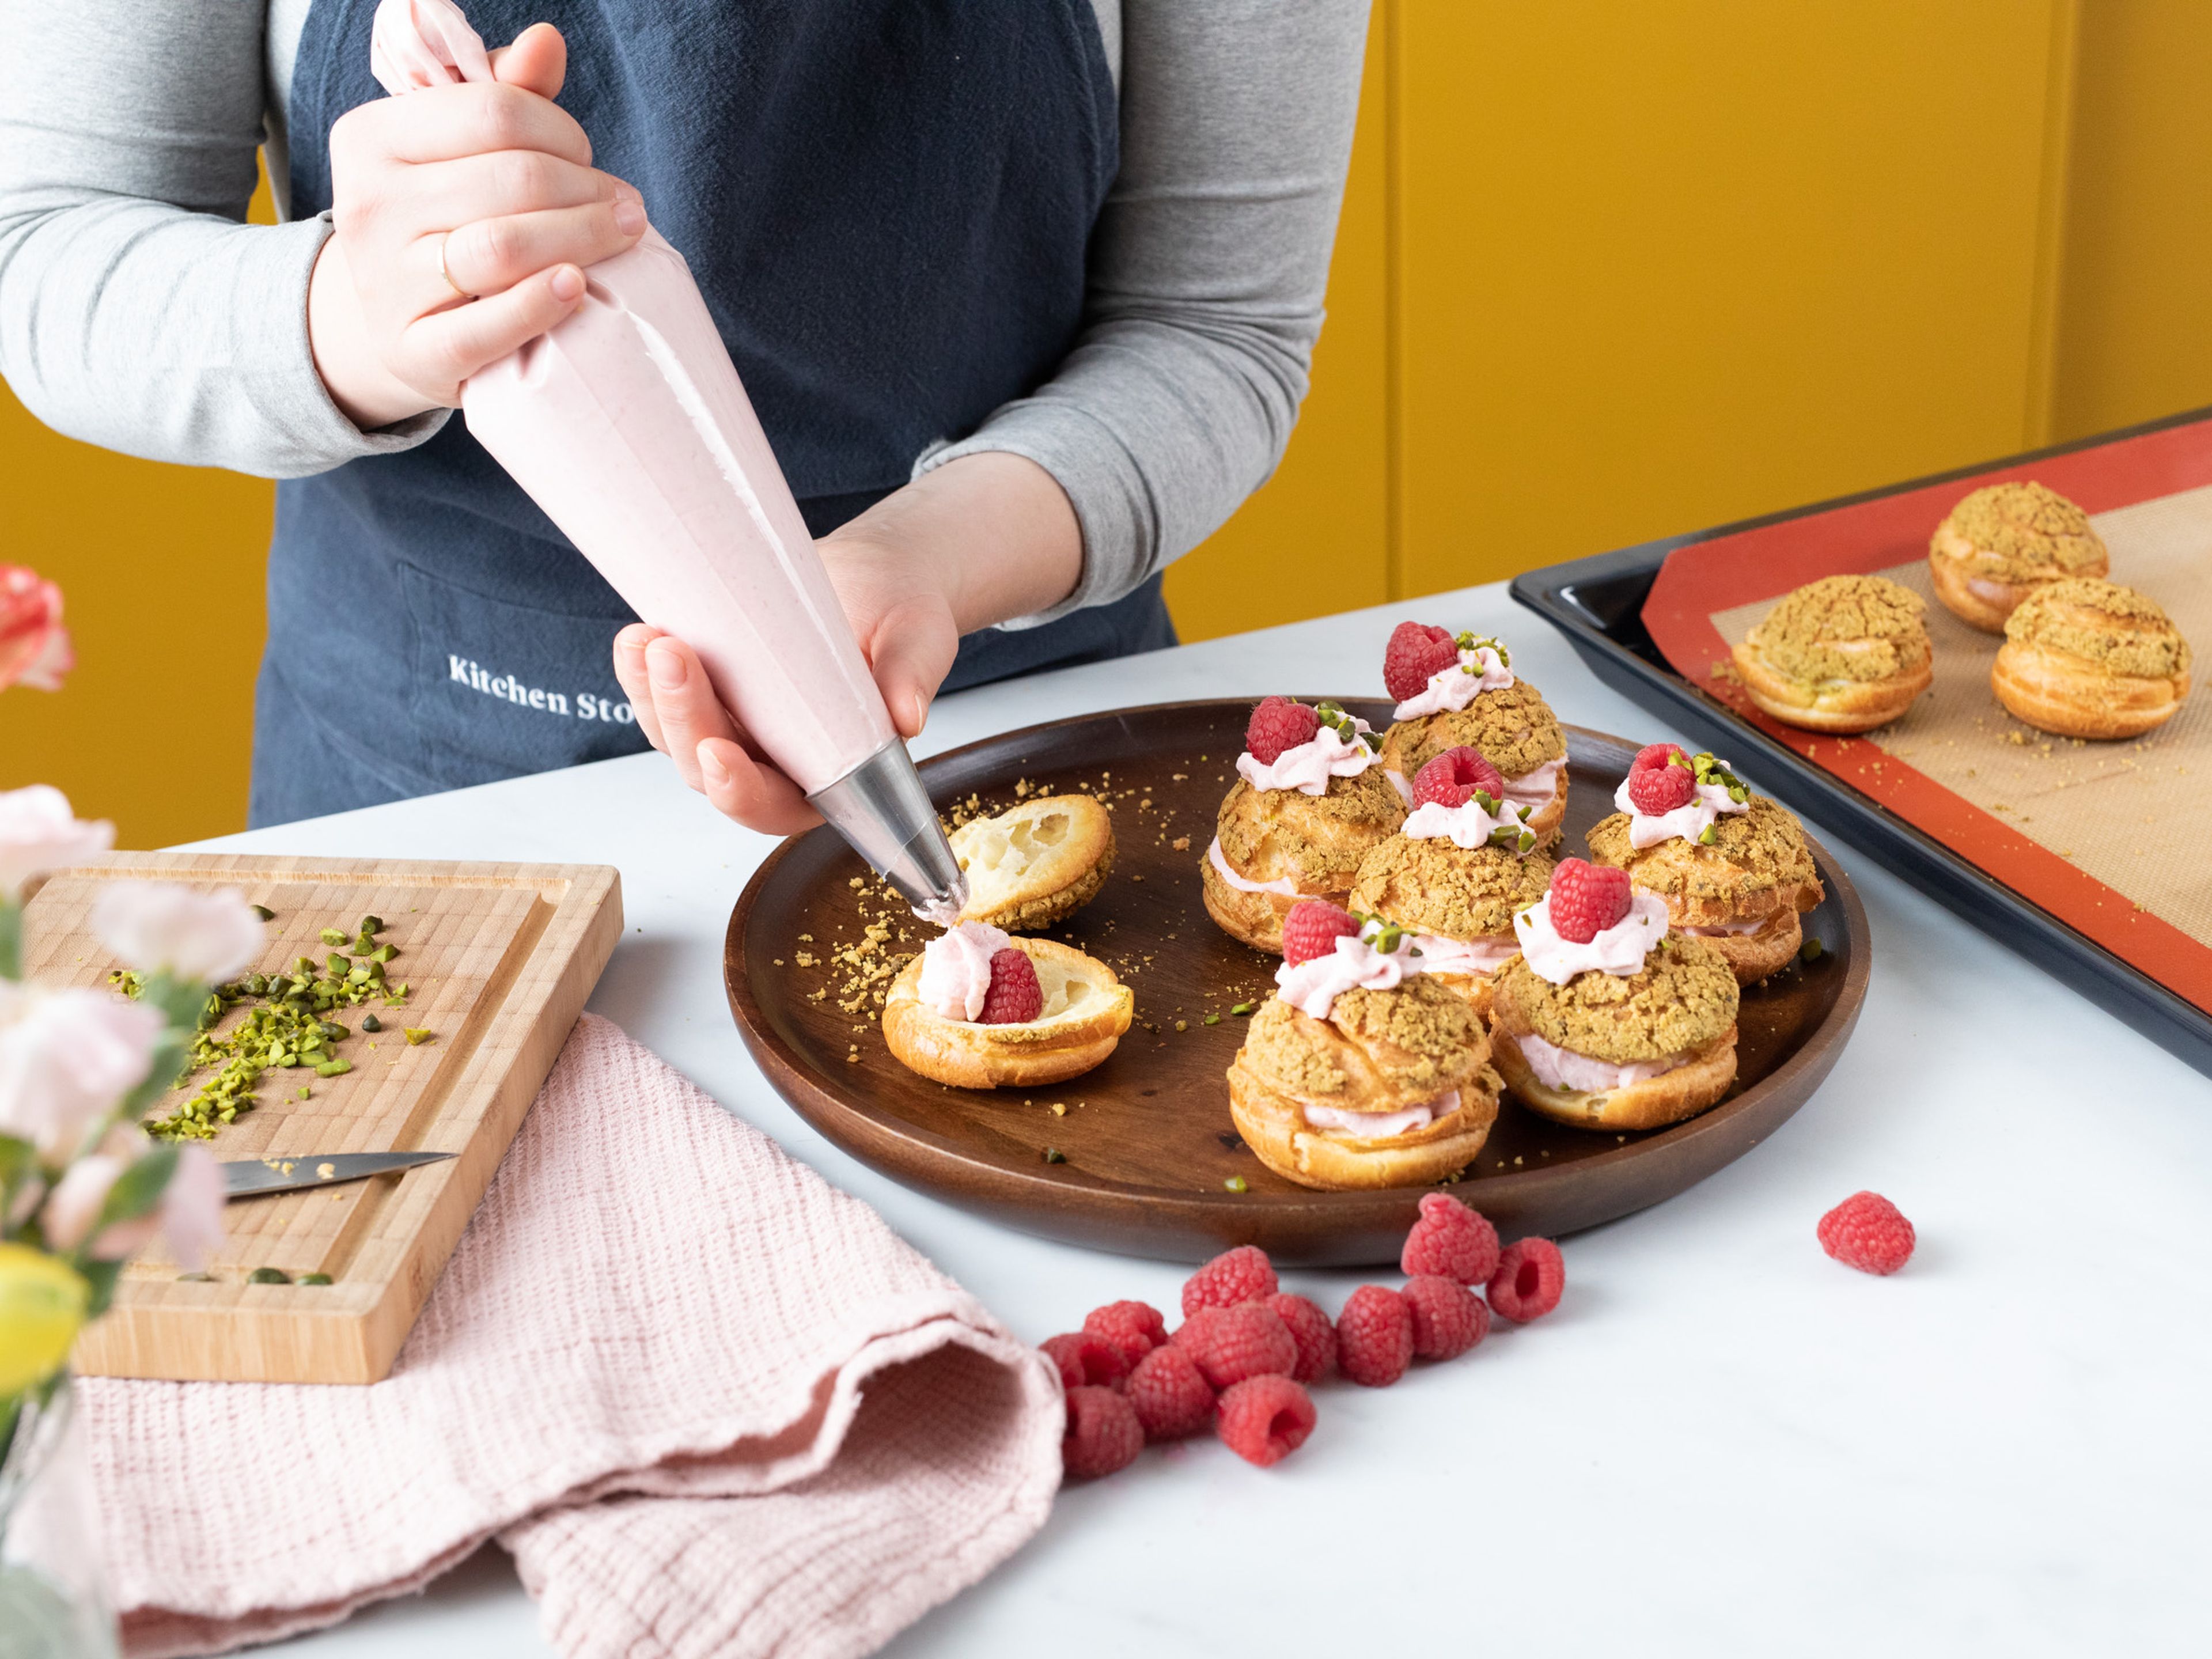 To assemble, carefully halve the cream puffs and fill each pair with raspberry cream and fresh raspberries. Decorate with extra pistachios, raspberries, and confectioner’s sugar. Enjoy!